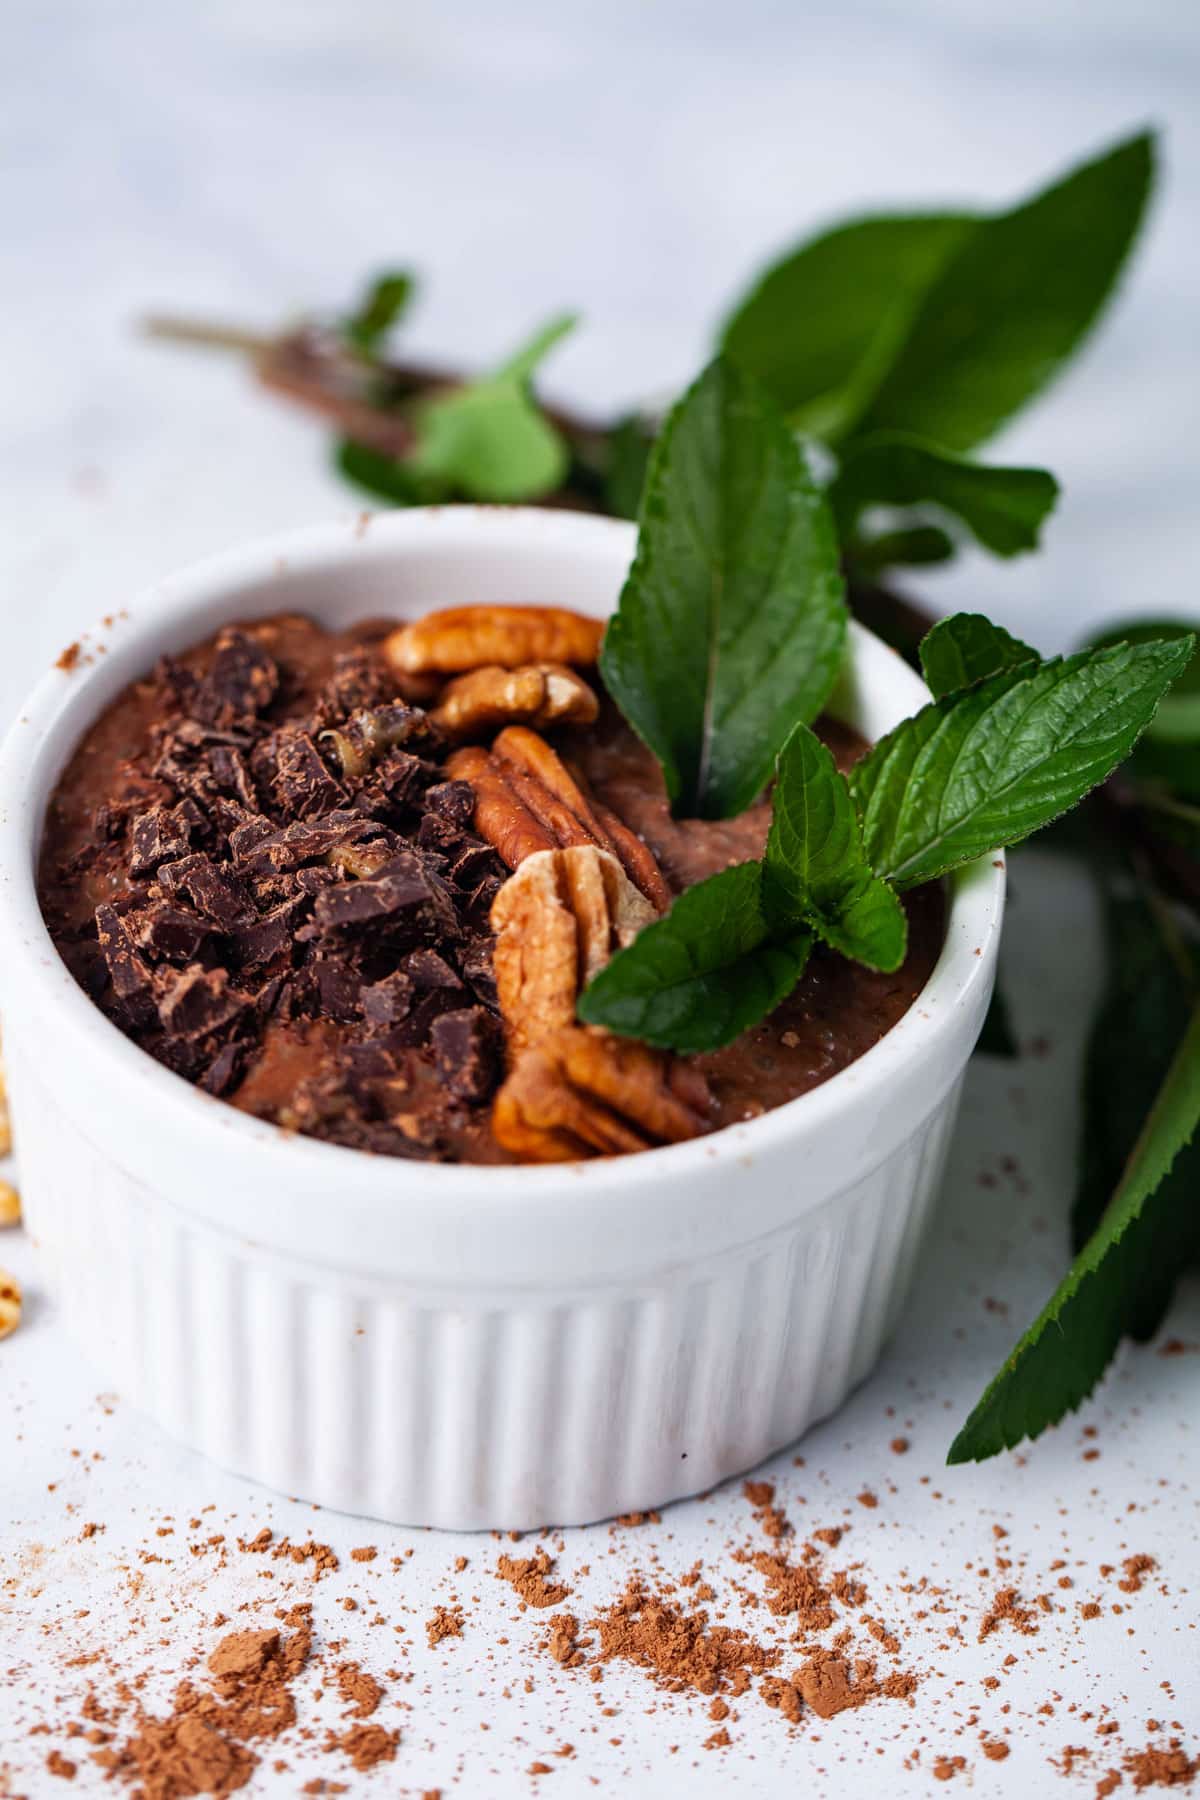 A ramekin filled with chocolate chia pudding topped with shaved chocolate, pecans, and fresh chocolate mint leaves.